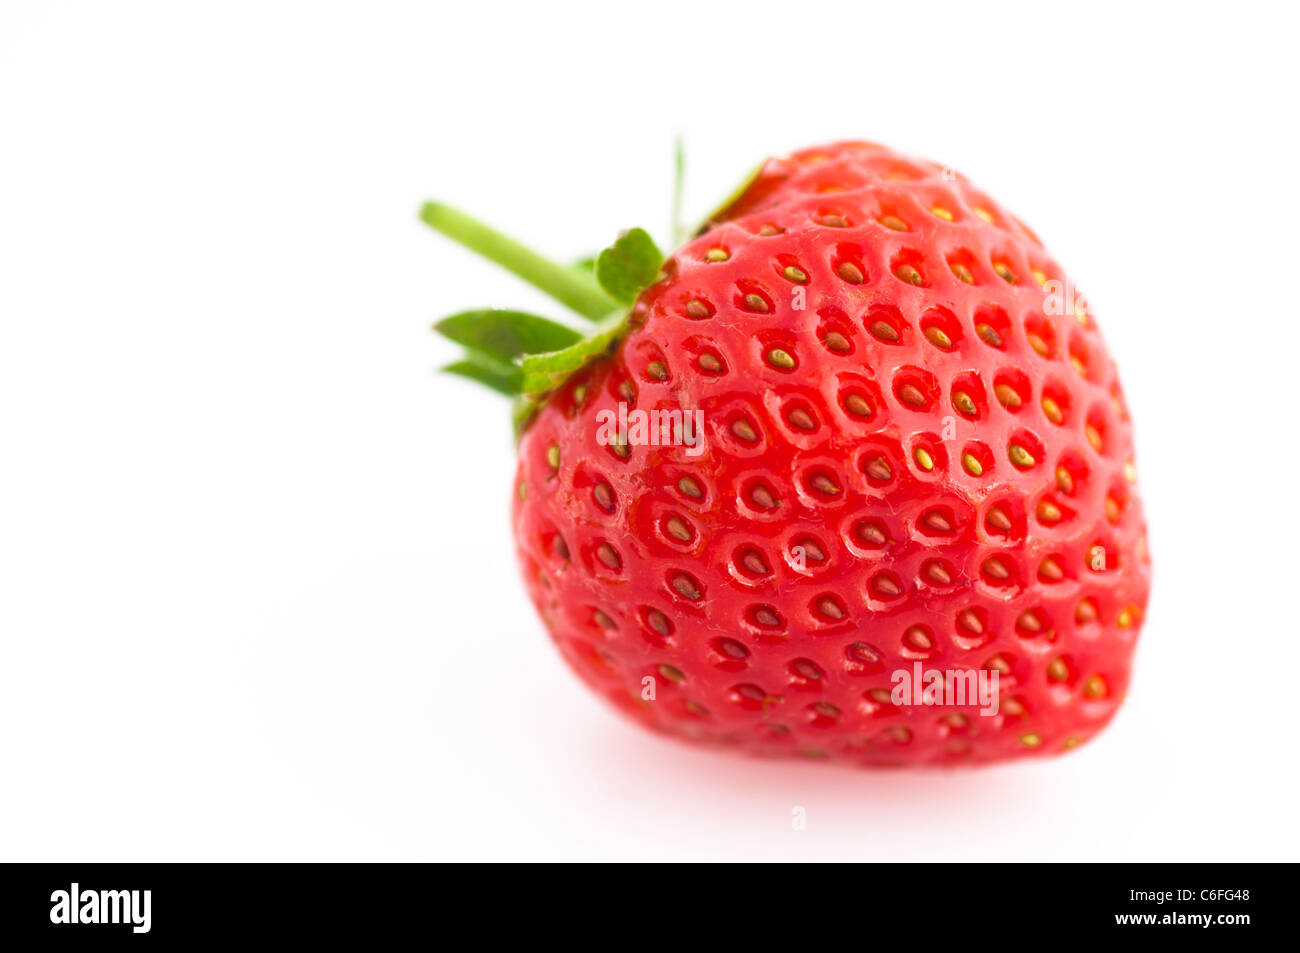 Close Up of One Strawberry on a White Background. Stock Photo